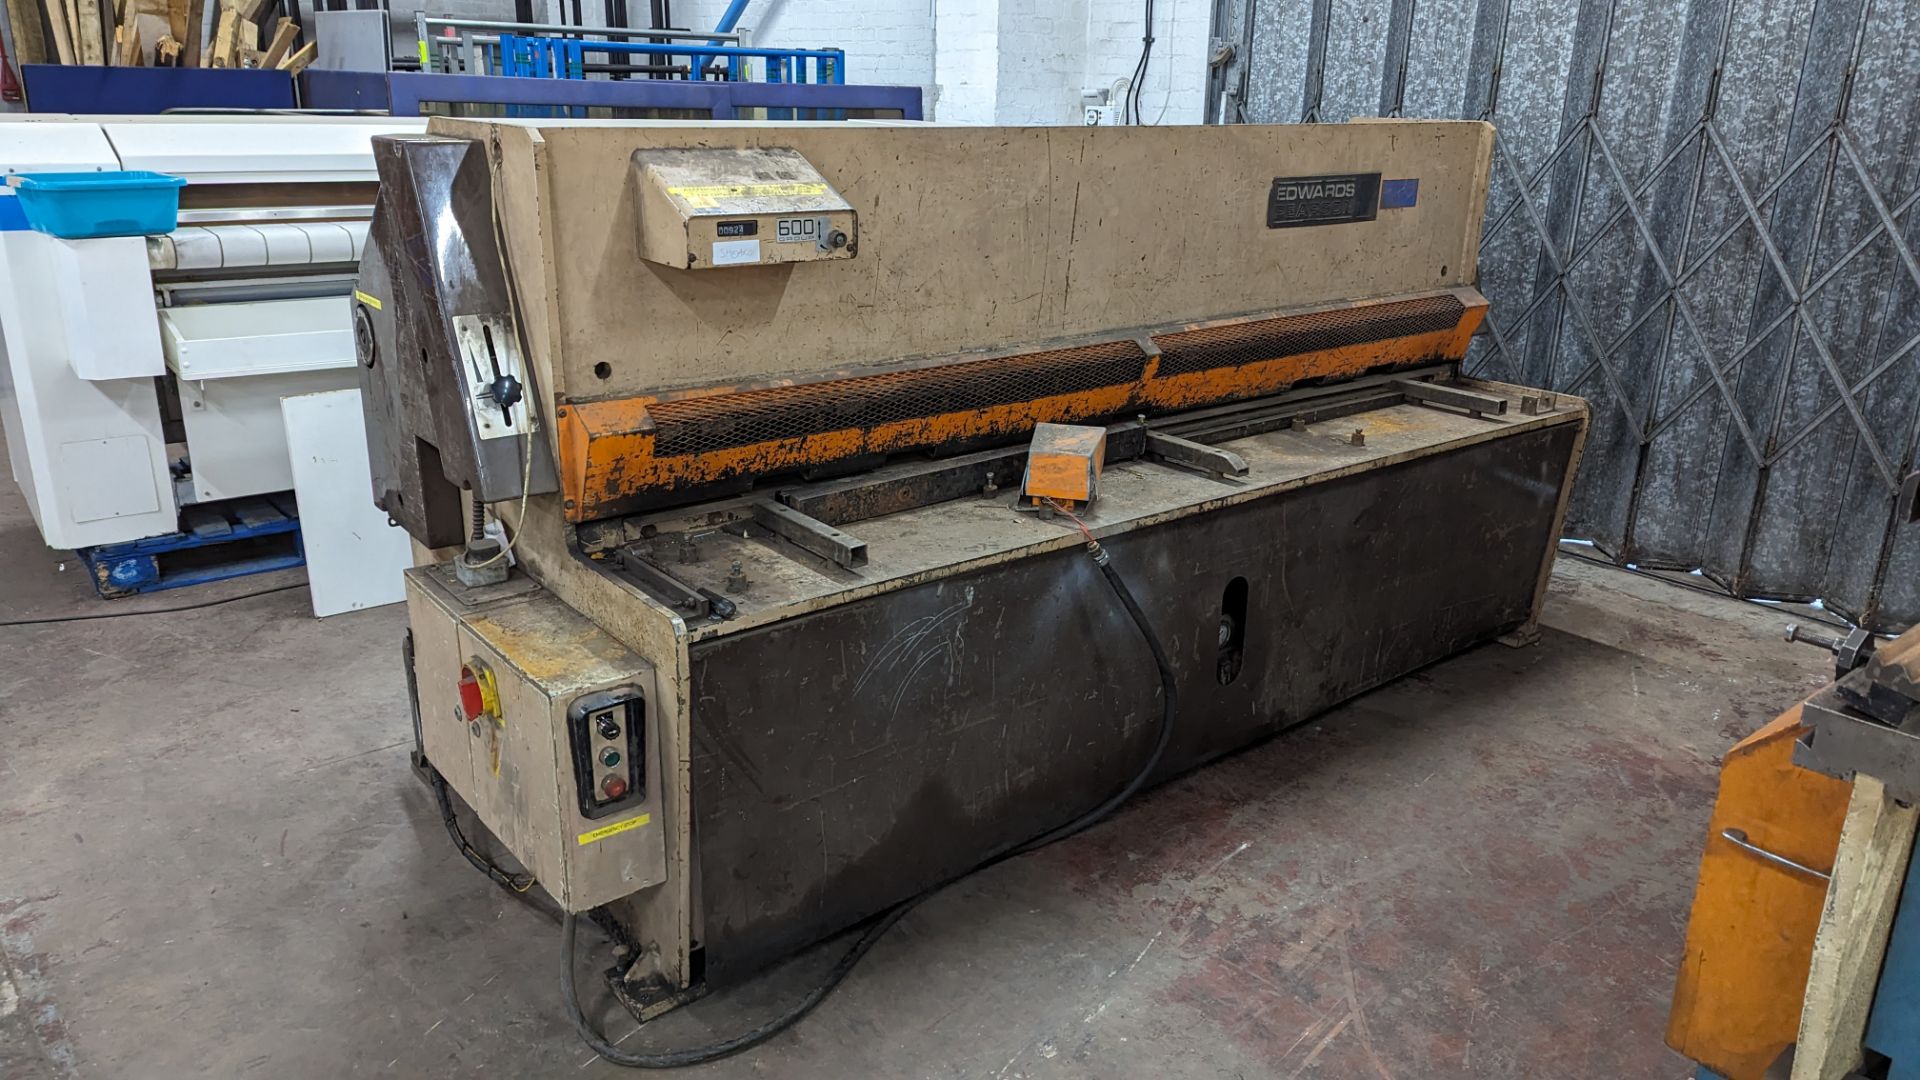 Edwards Pearson 600 shear. Please Note this item is too heavy for us to load with our Fork Lift